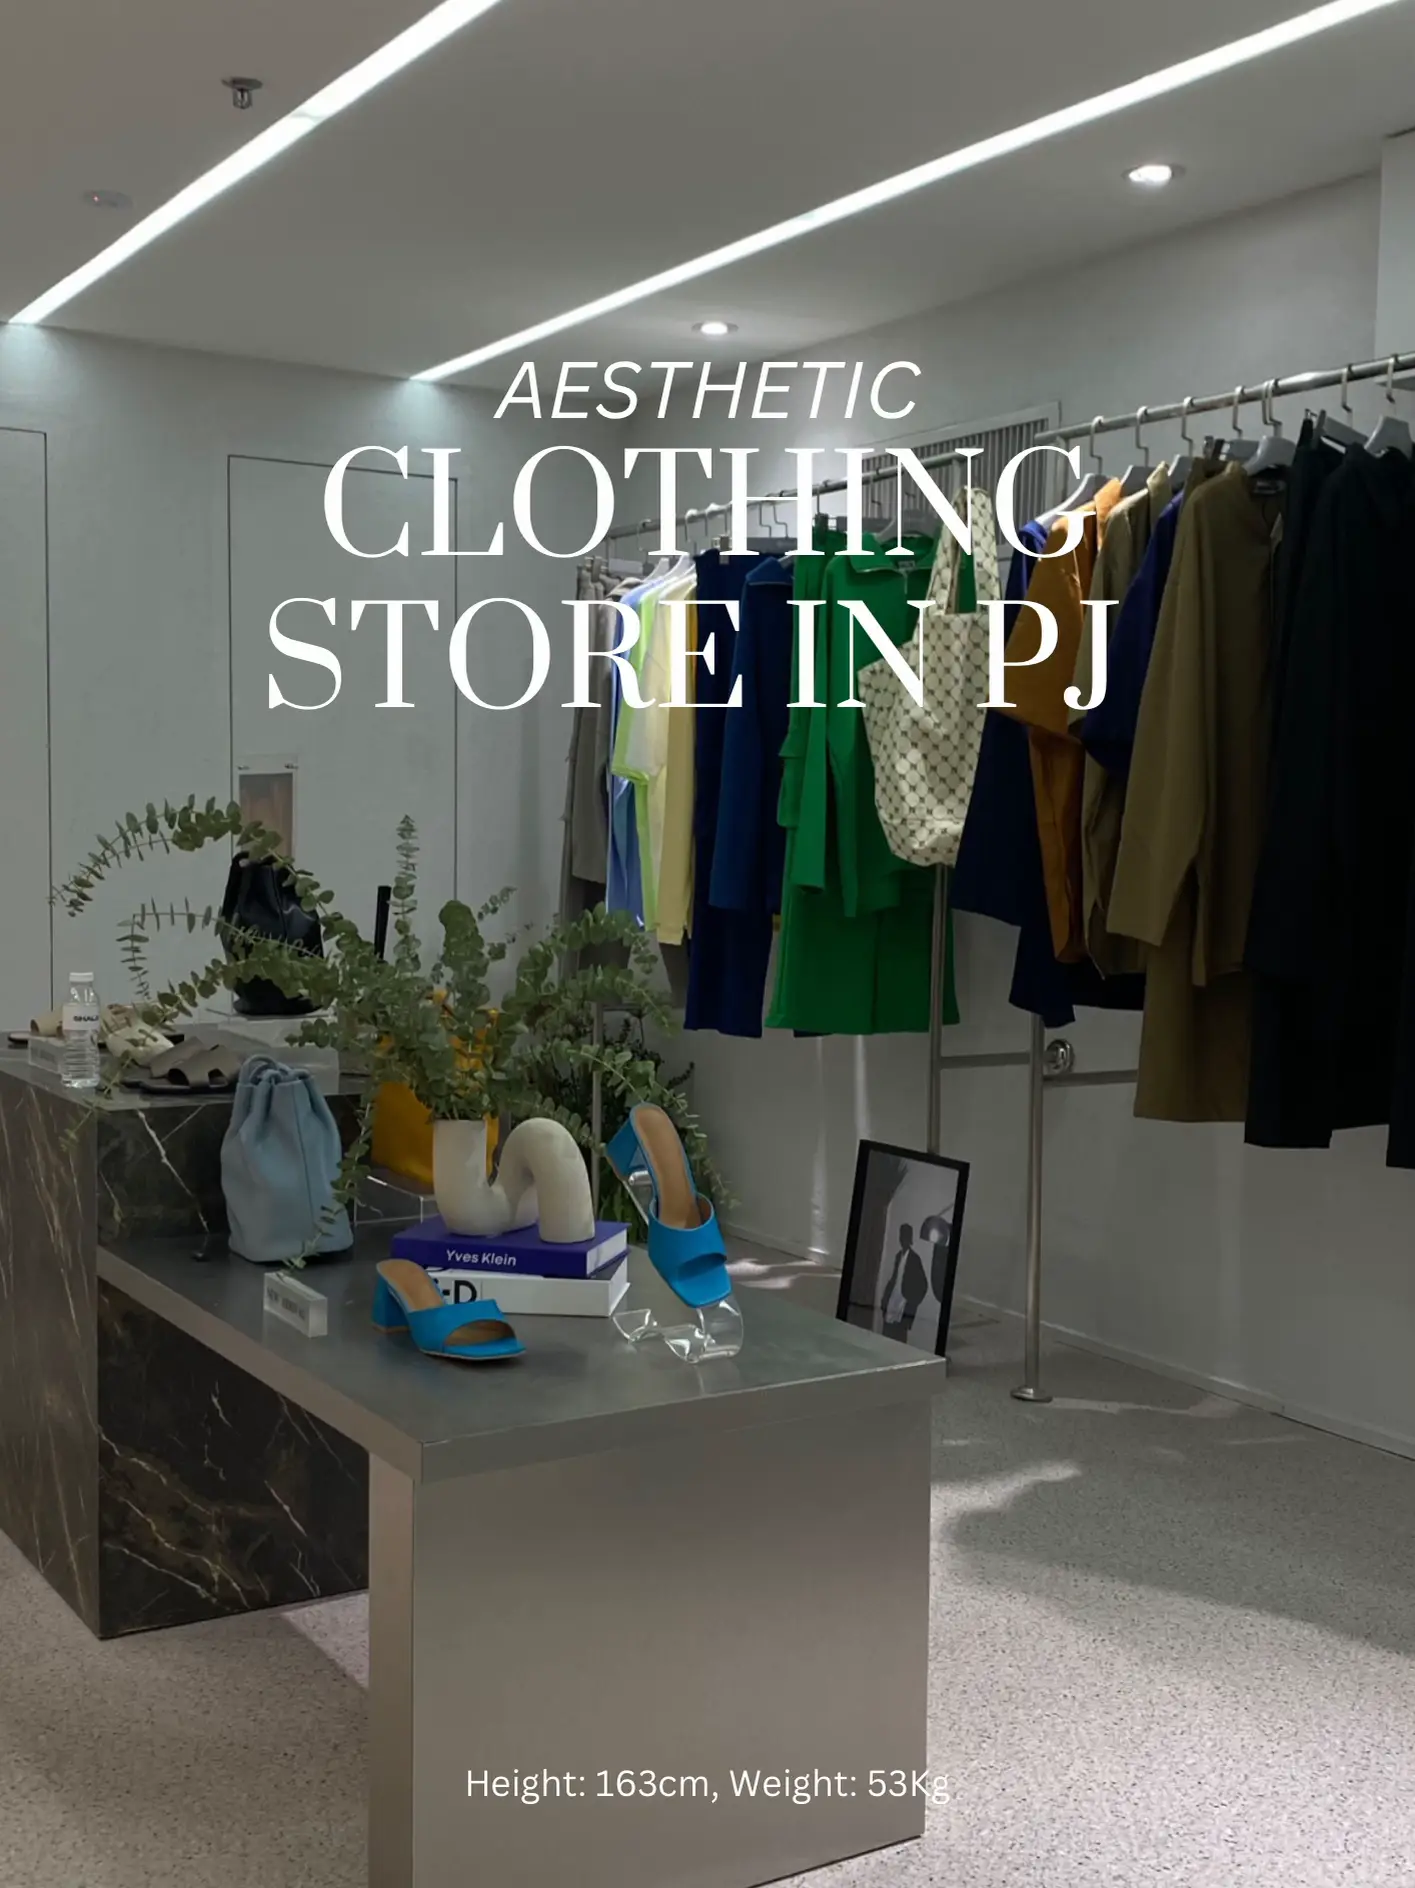 AESTHETIC CLOTHING STORE